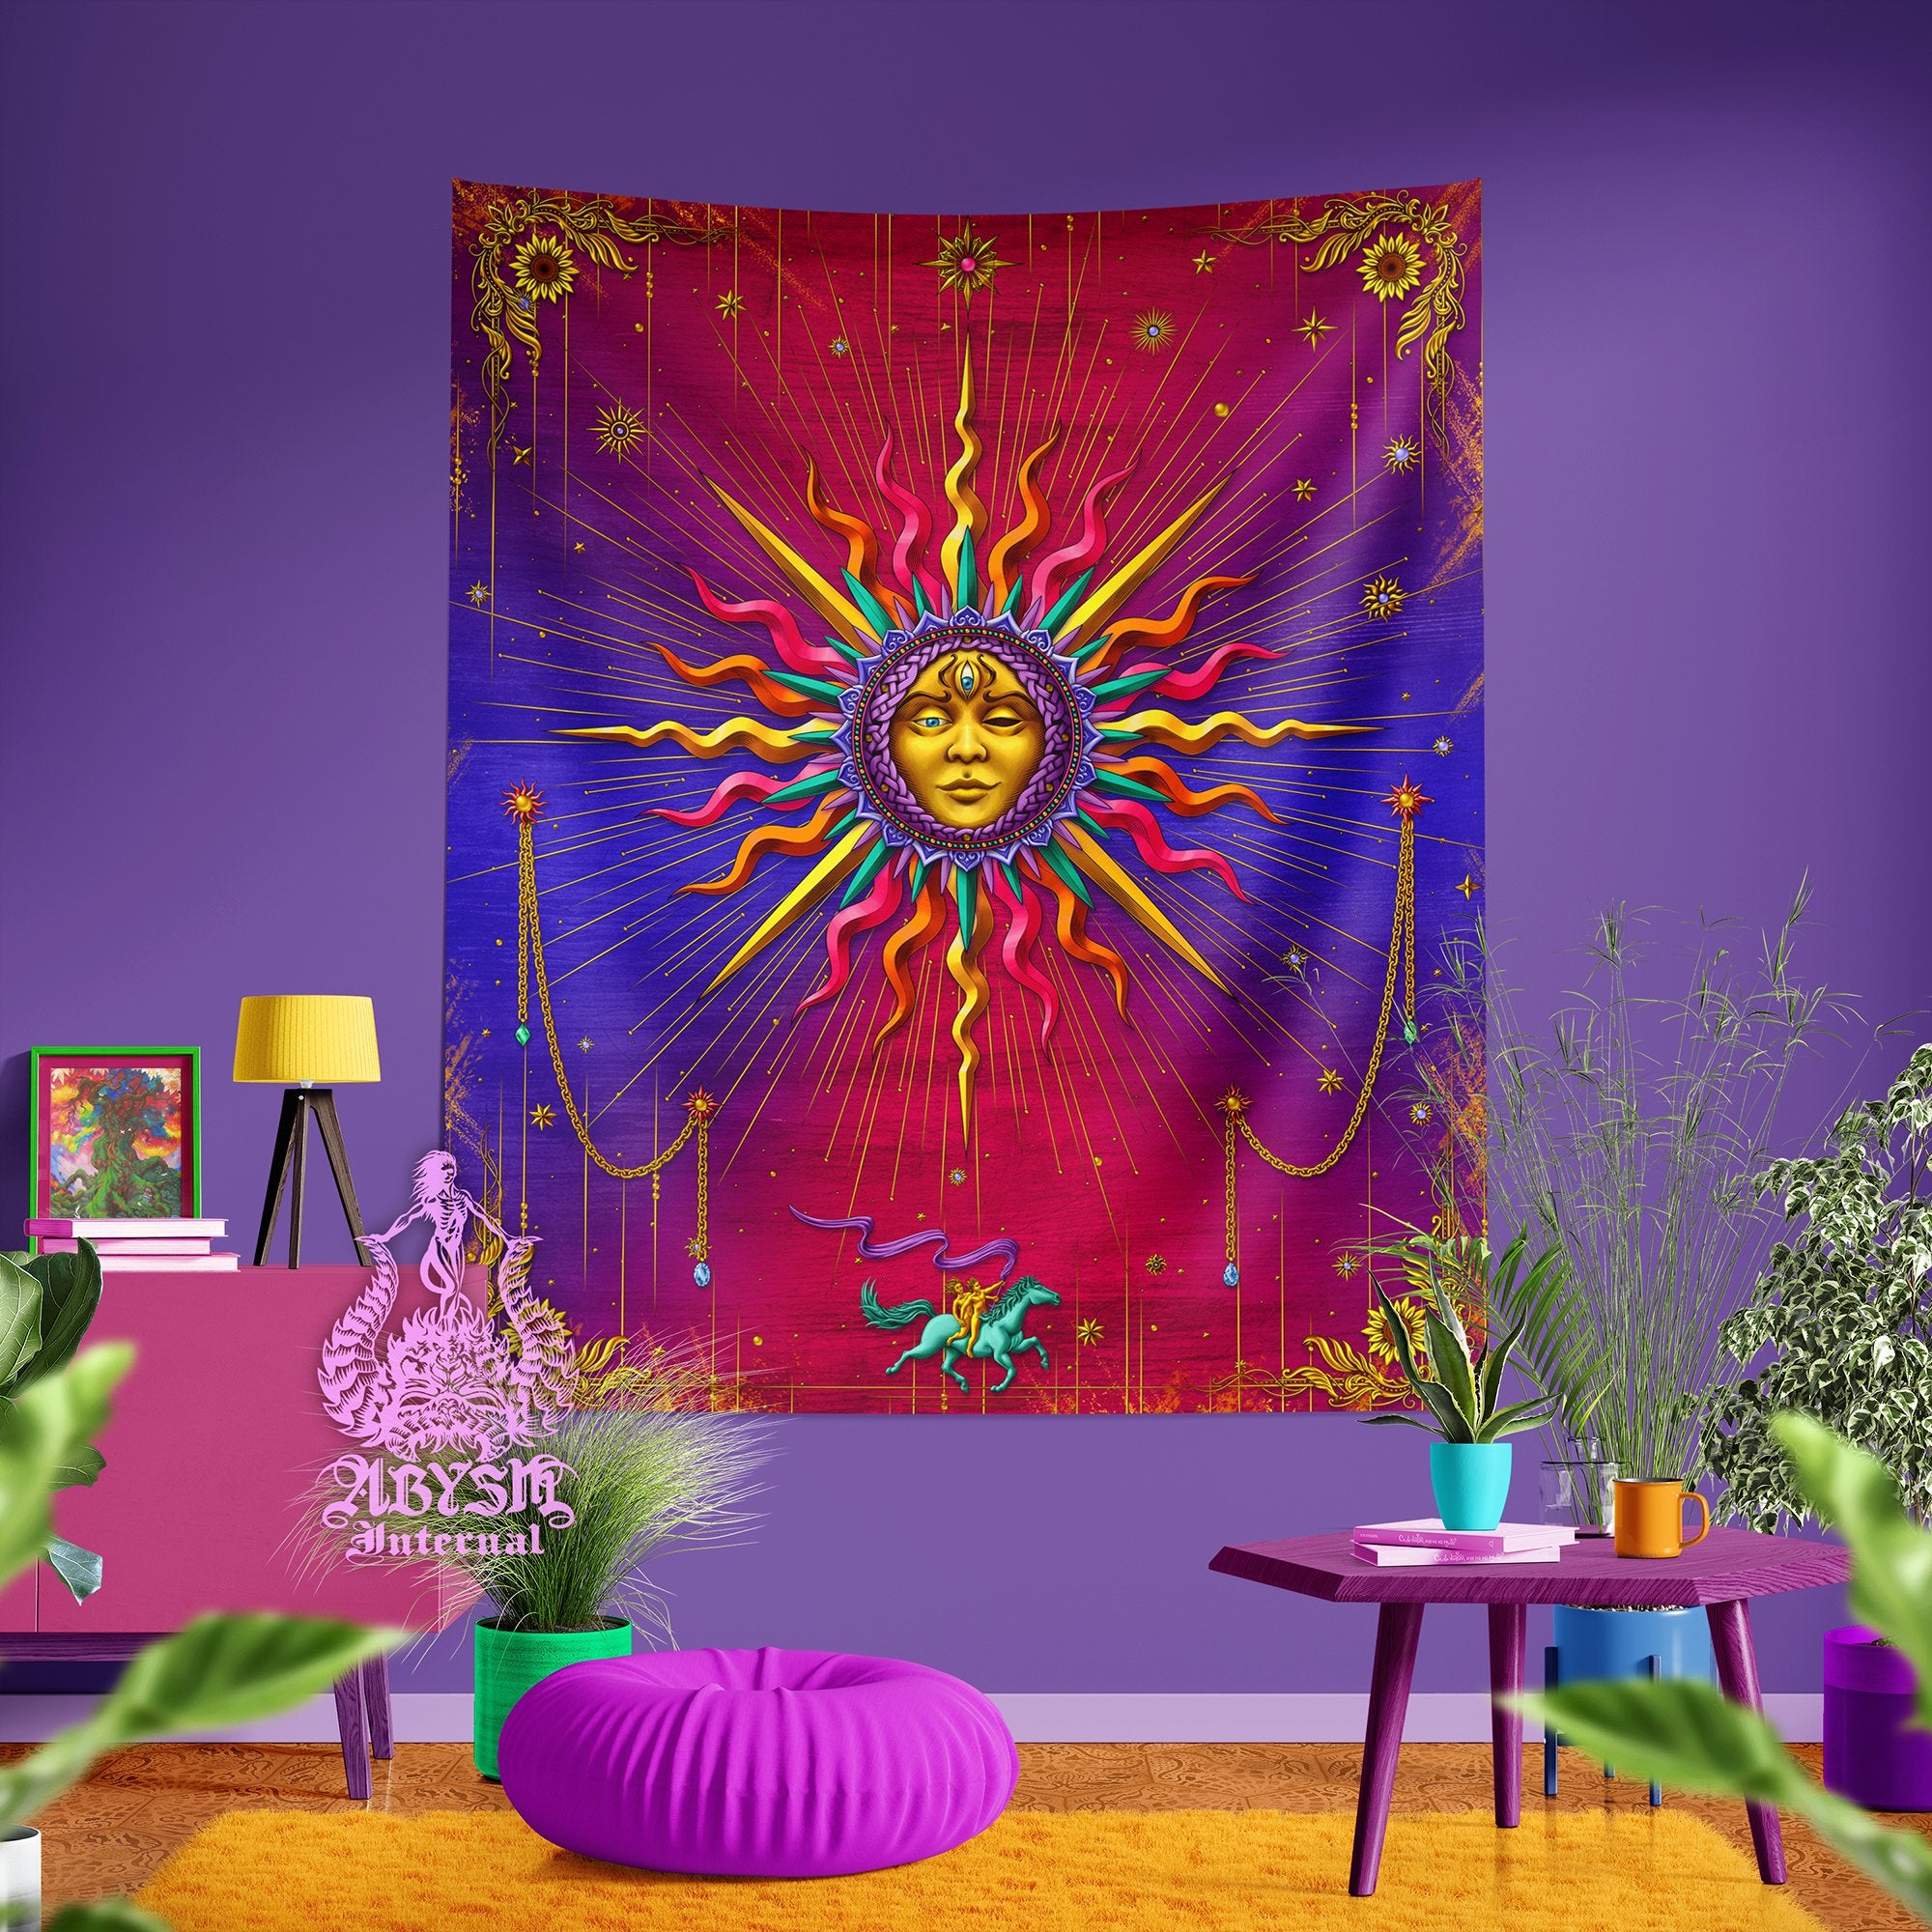 Sun Tapestry, Tarot Card Arcana Wall Hanging, Magic and Esoteric Art, Boho and Indie Home Decor, Vertical Print - Psy - Abysm Internal